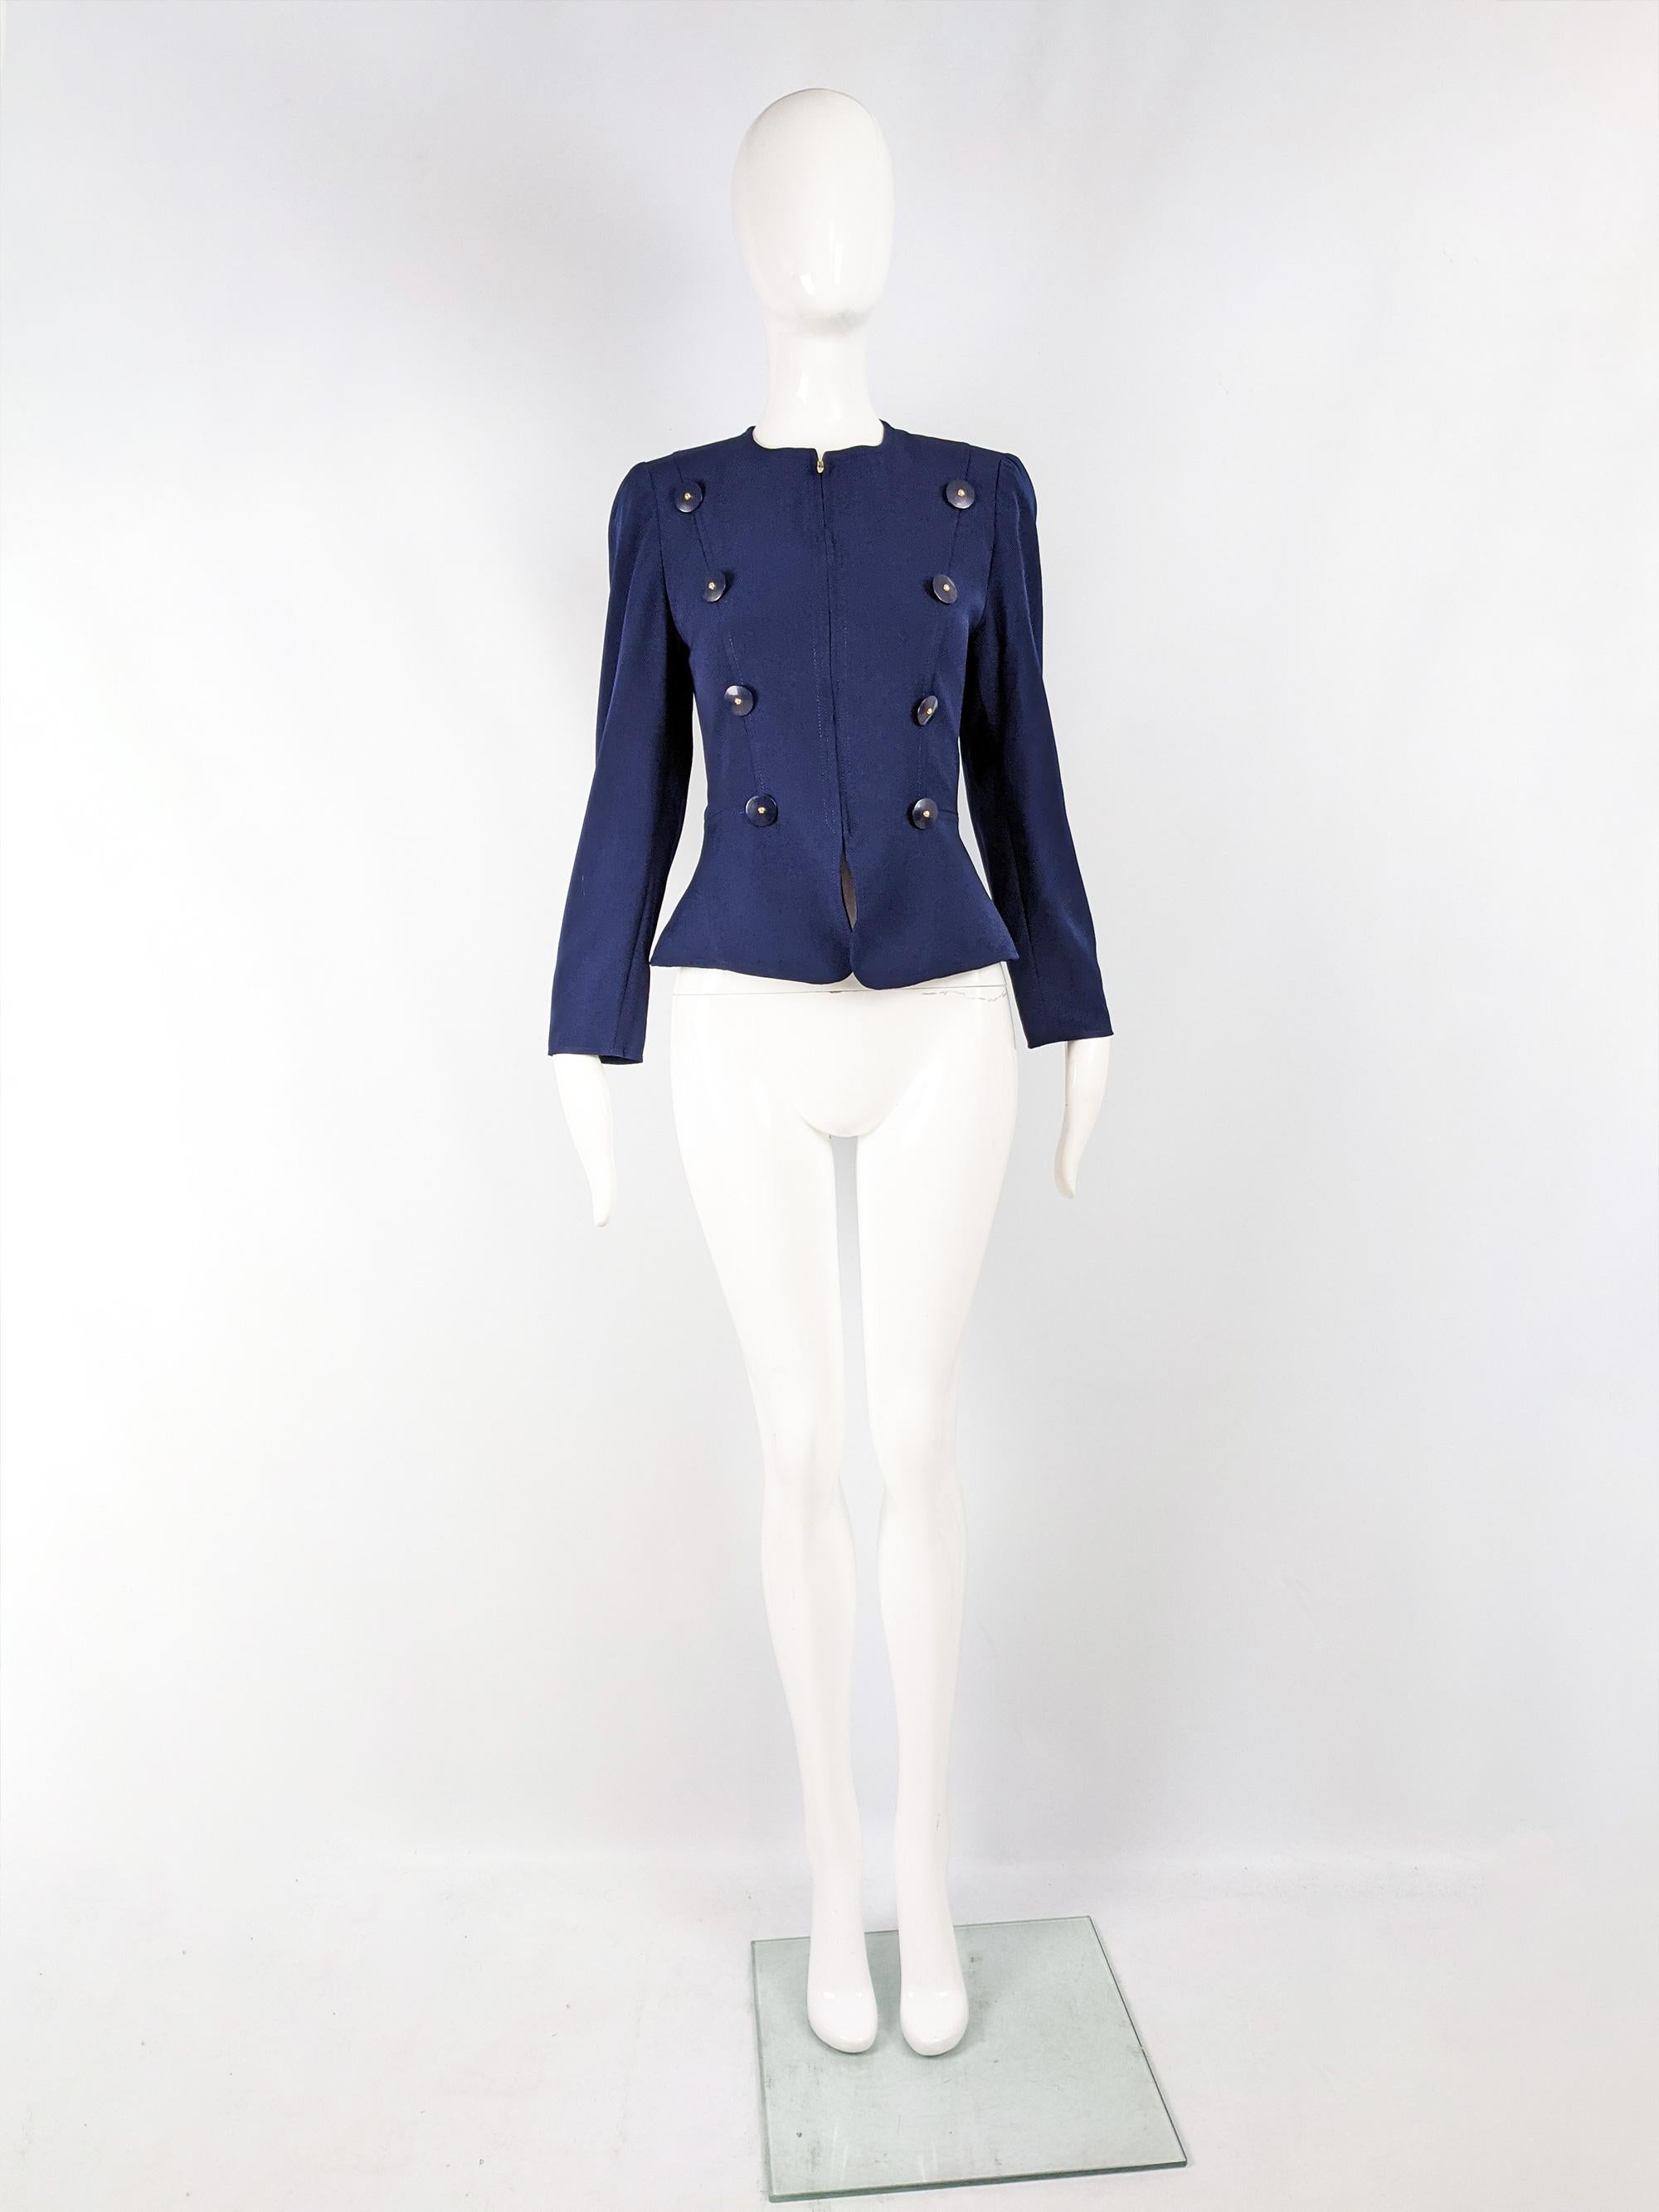 A chic vintage womens Christian Lacroix blazer from the 80s. In a blue wool with statement military style double breasted buttons, a collarless design and a fitted cut that flares out slightly at the hem, creating an hourglass silhouette. 

Size: